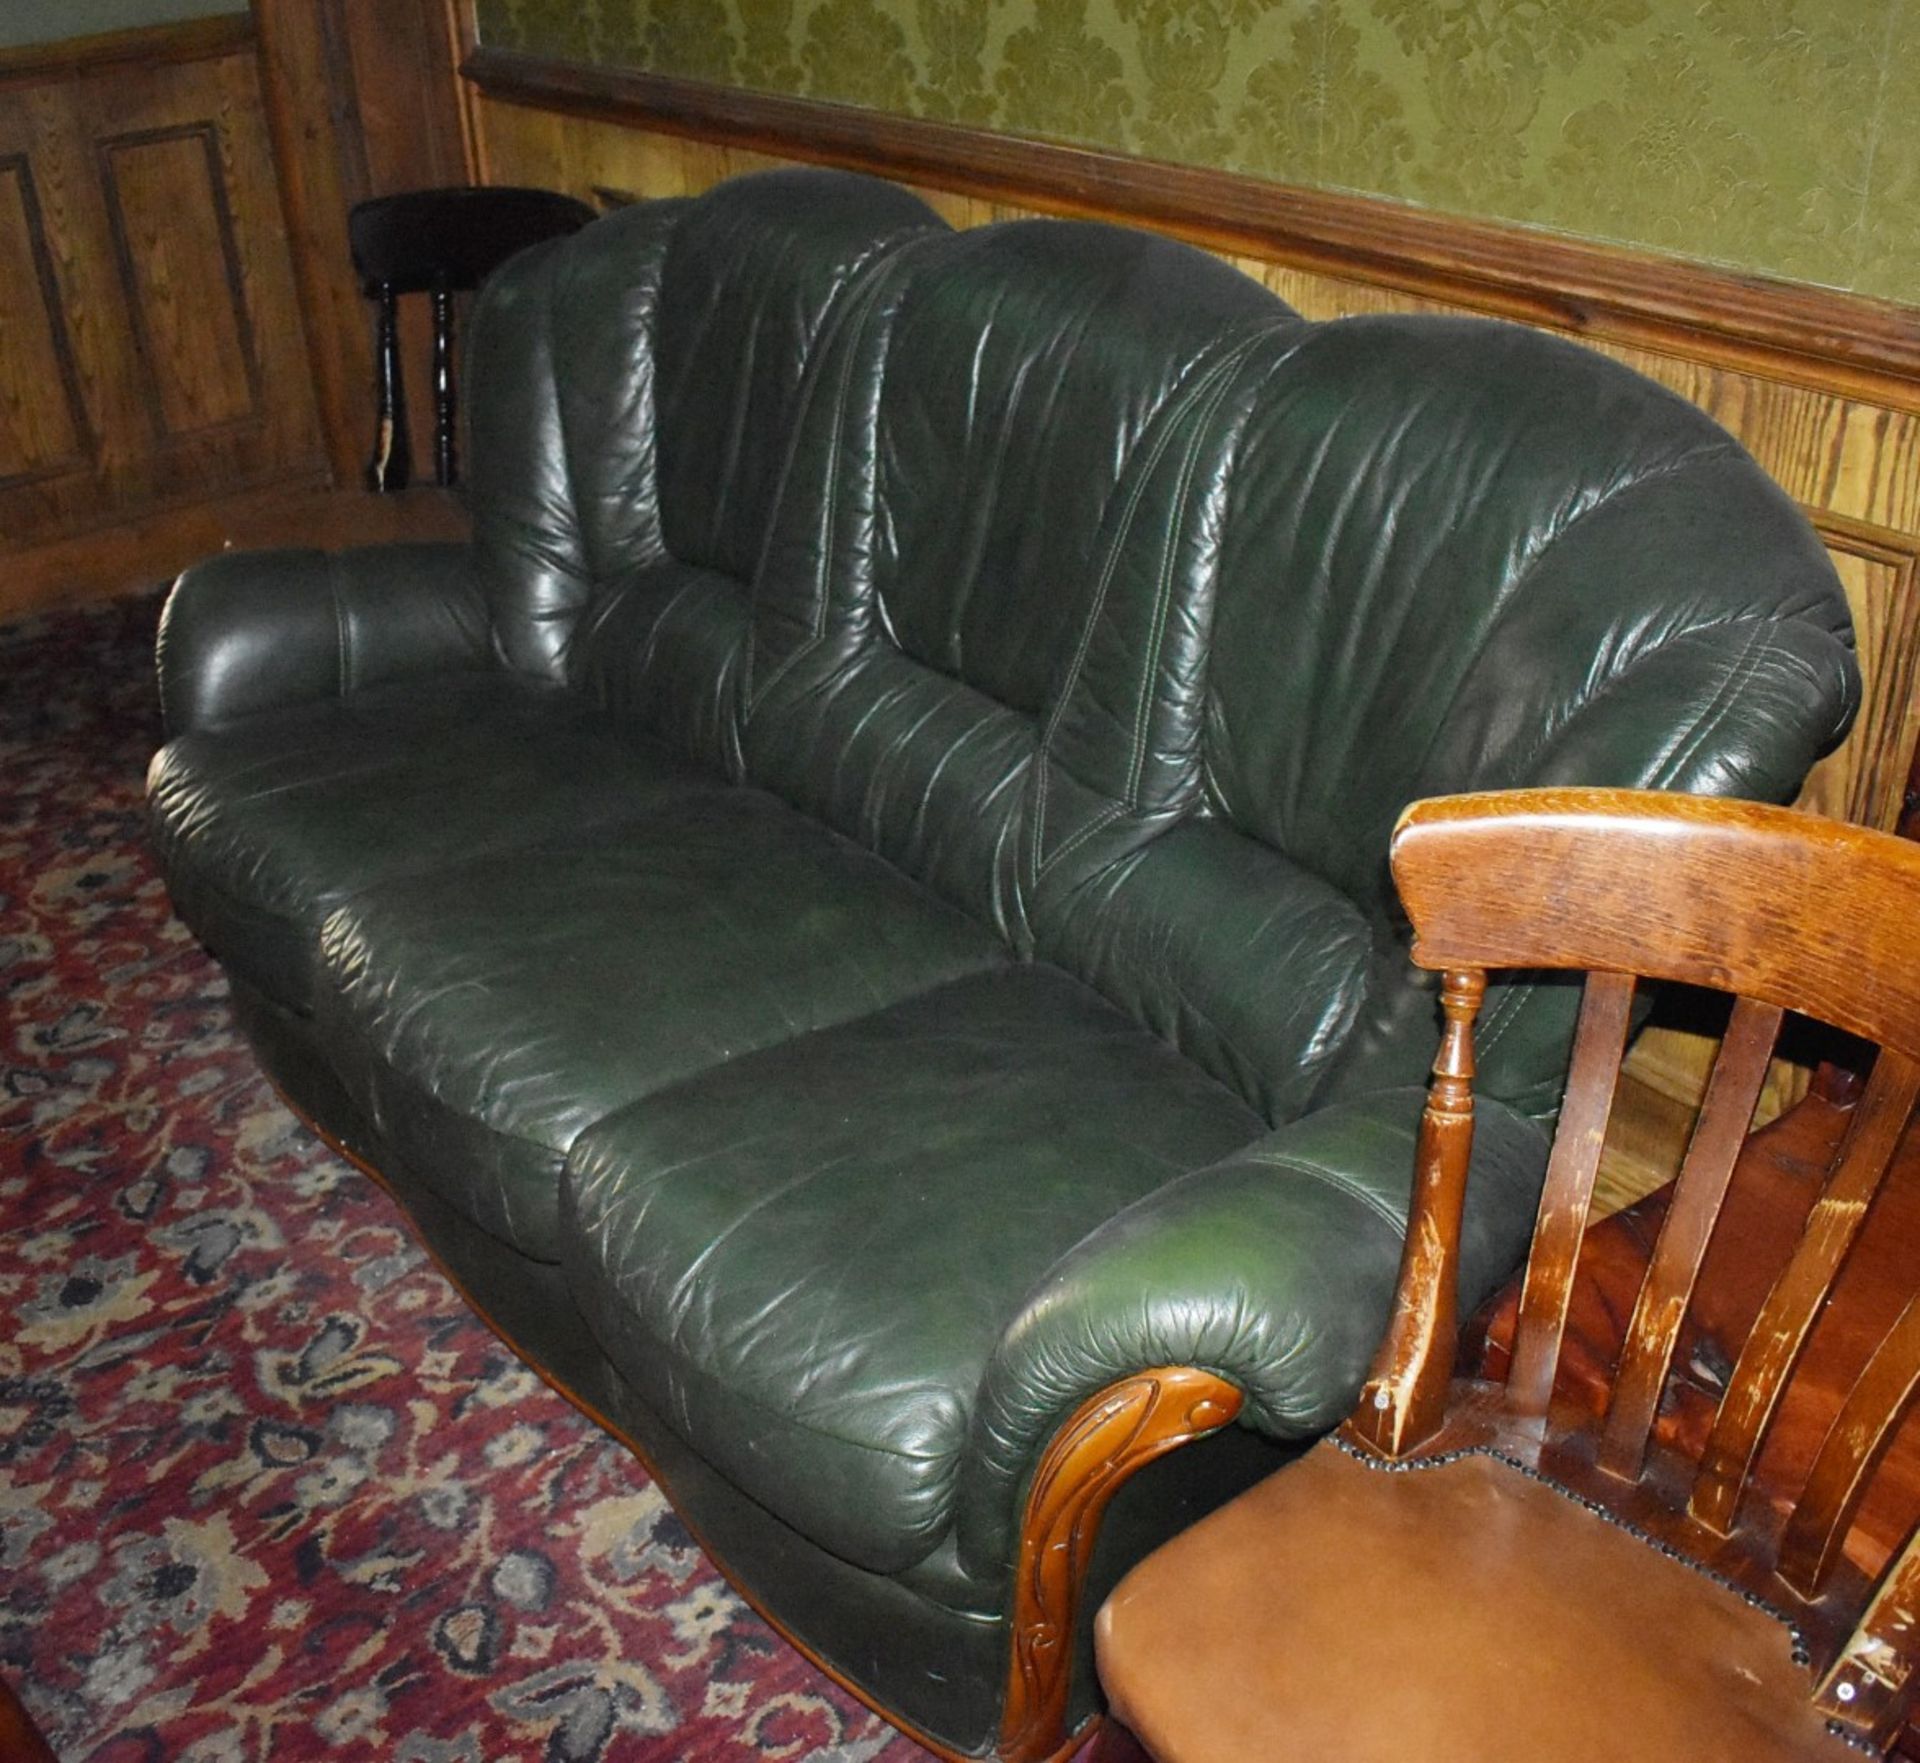 1 x Sofa - Green Leather With Wood Detail - CL586 - Location: Stockport SK1 This item is to be